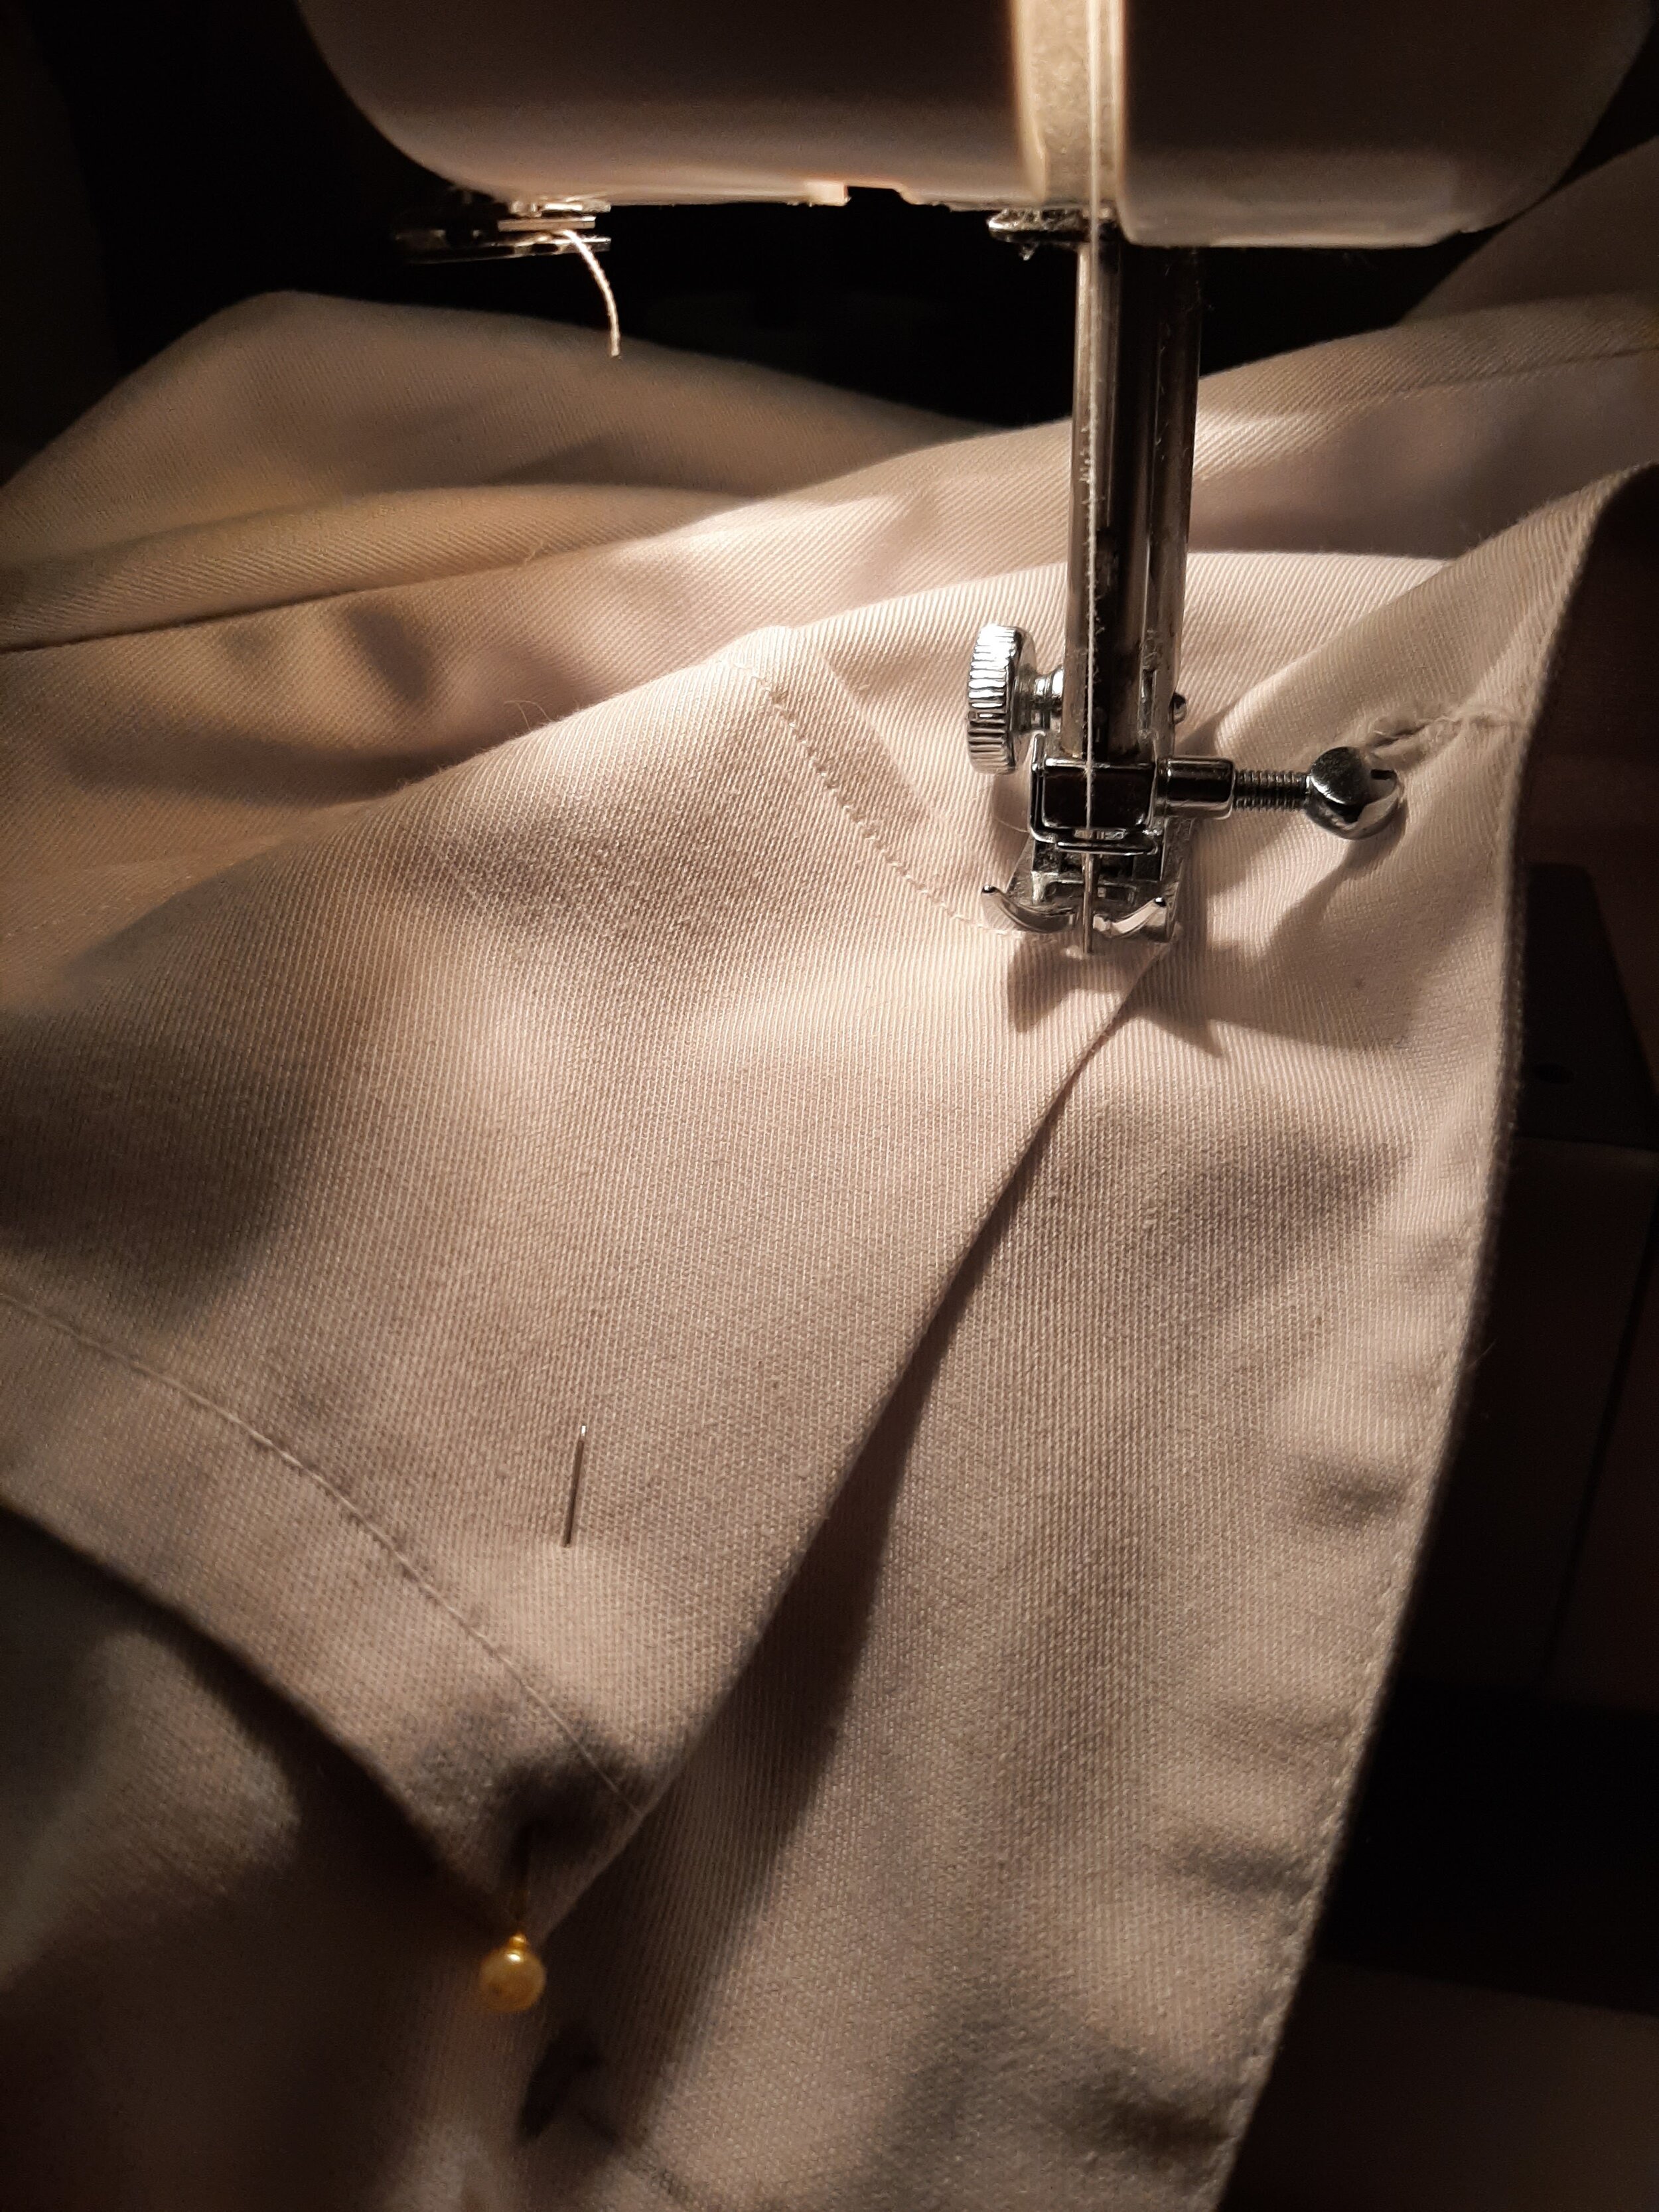 The most sewing always happens after dark.